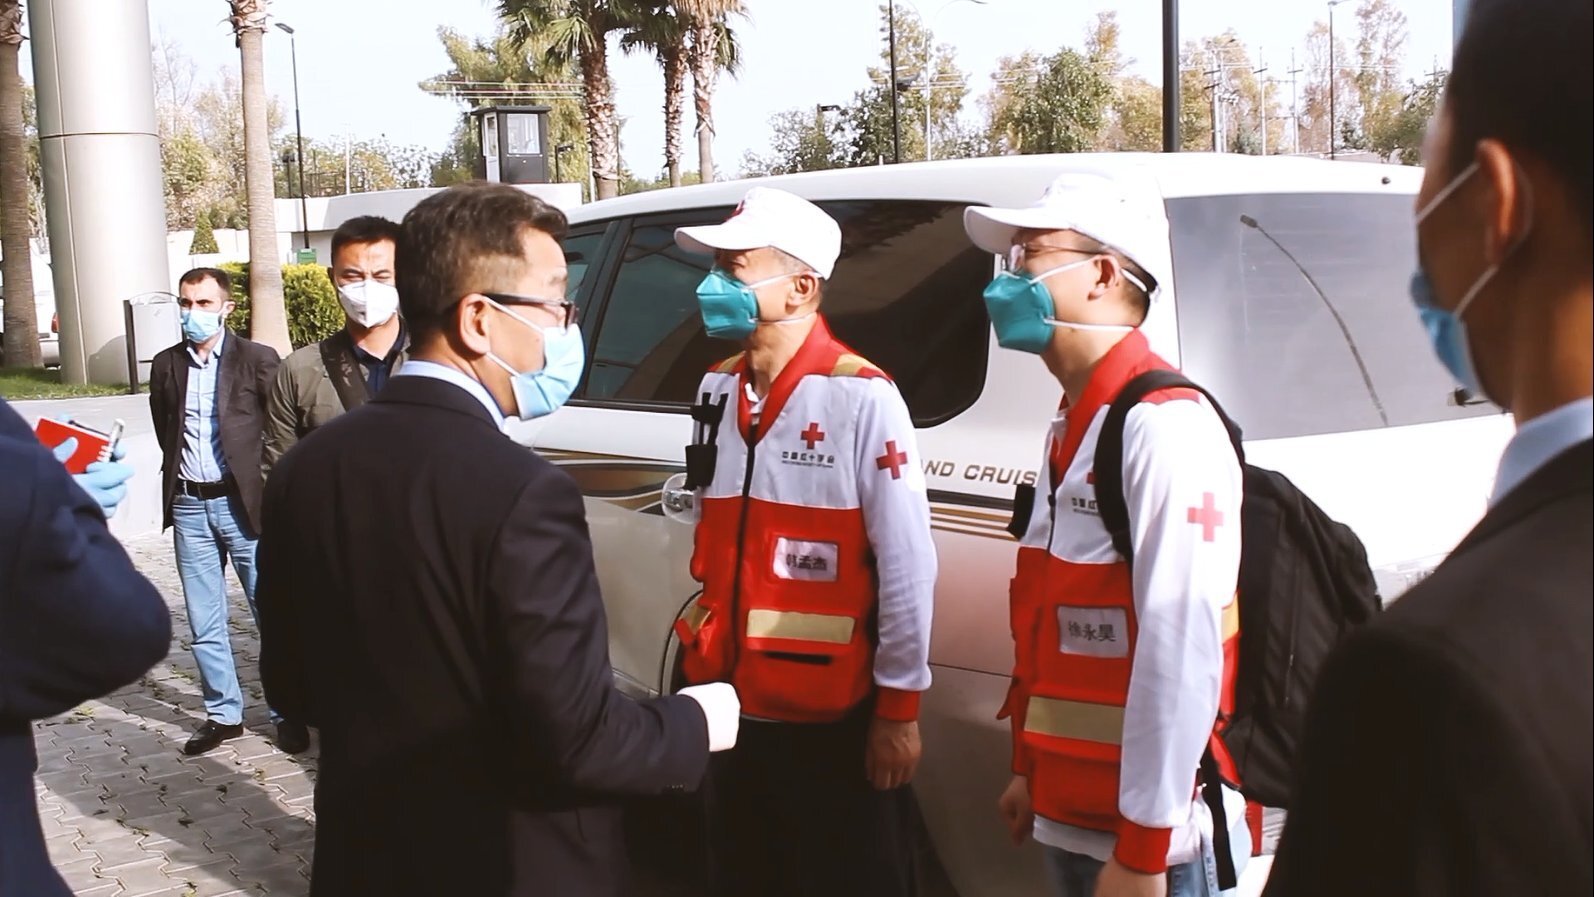 A Chinese medical envoy spent 50 days in Iraq, where they installed a CT scanner in Baghdad, visited 9 of Iraq's 18 provinces to train local doctors, donated tonnes of PPE aid, &amp; built a testing lab that can process 1000 tests/day. (Xinhua)